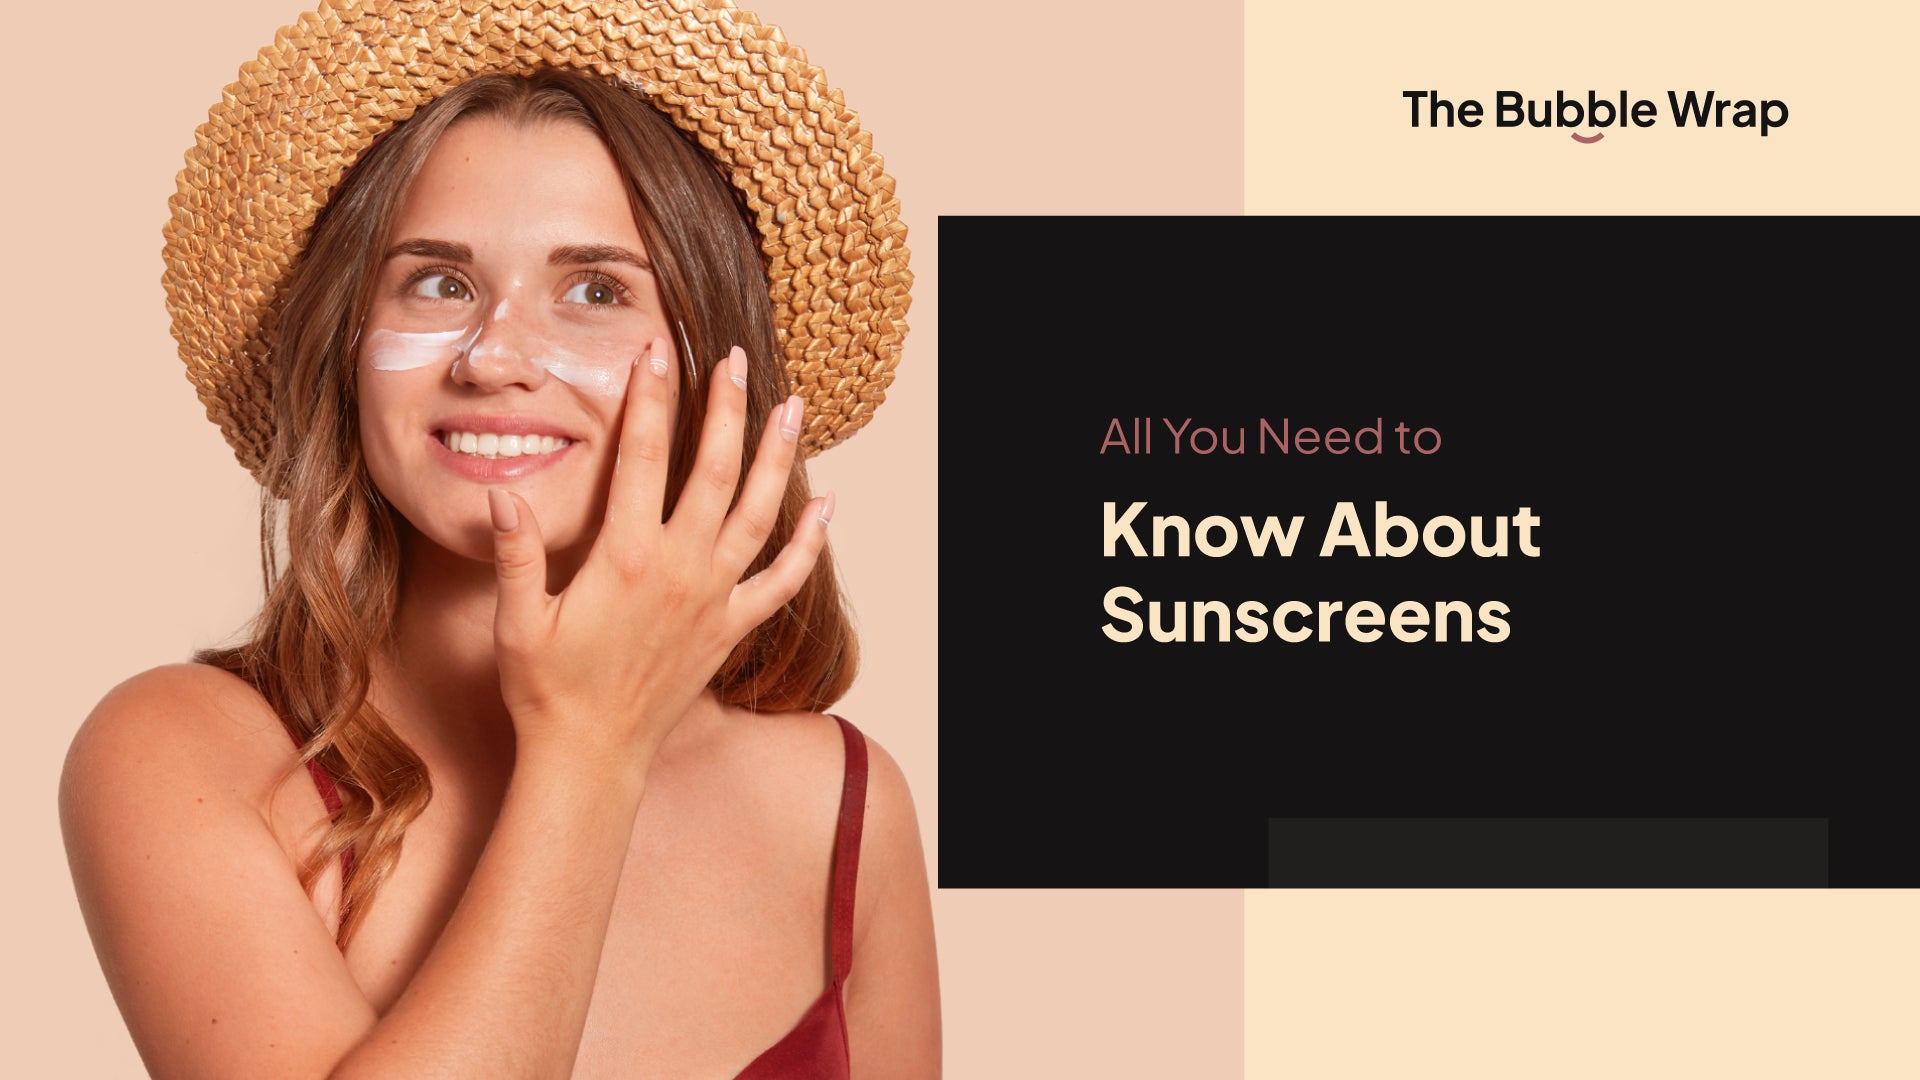 All You Need to Know About Sunscreens